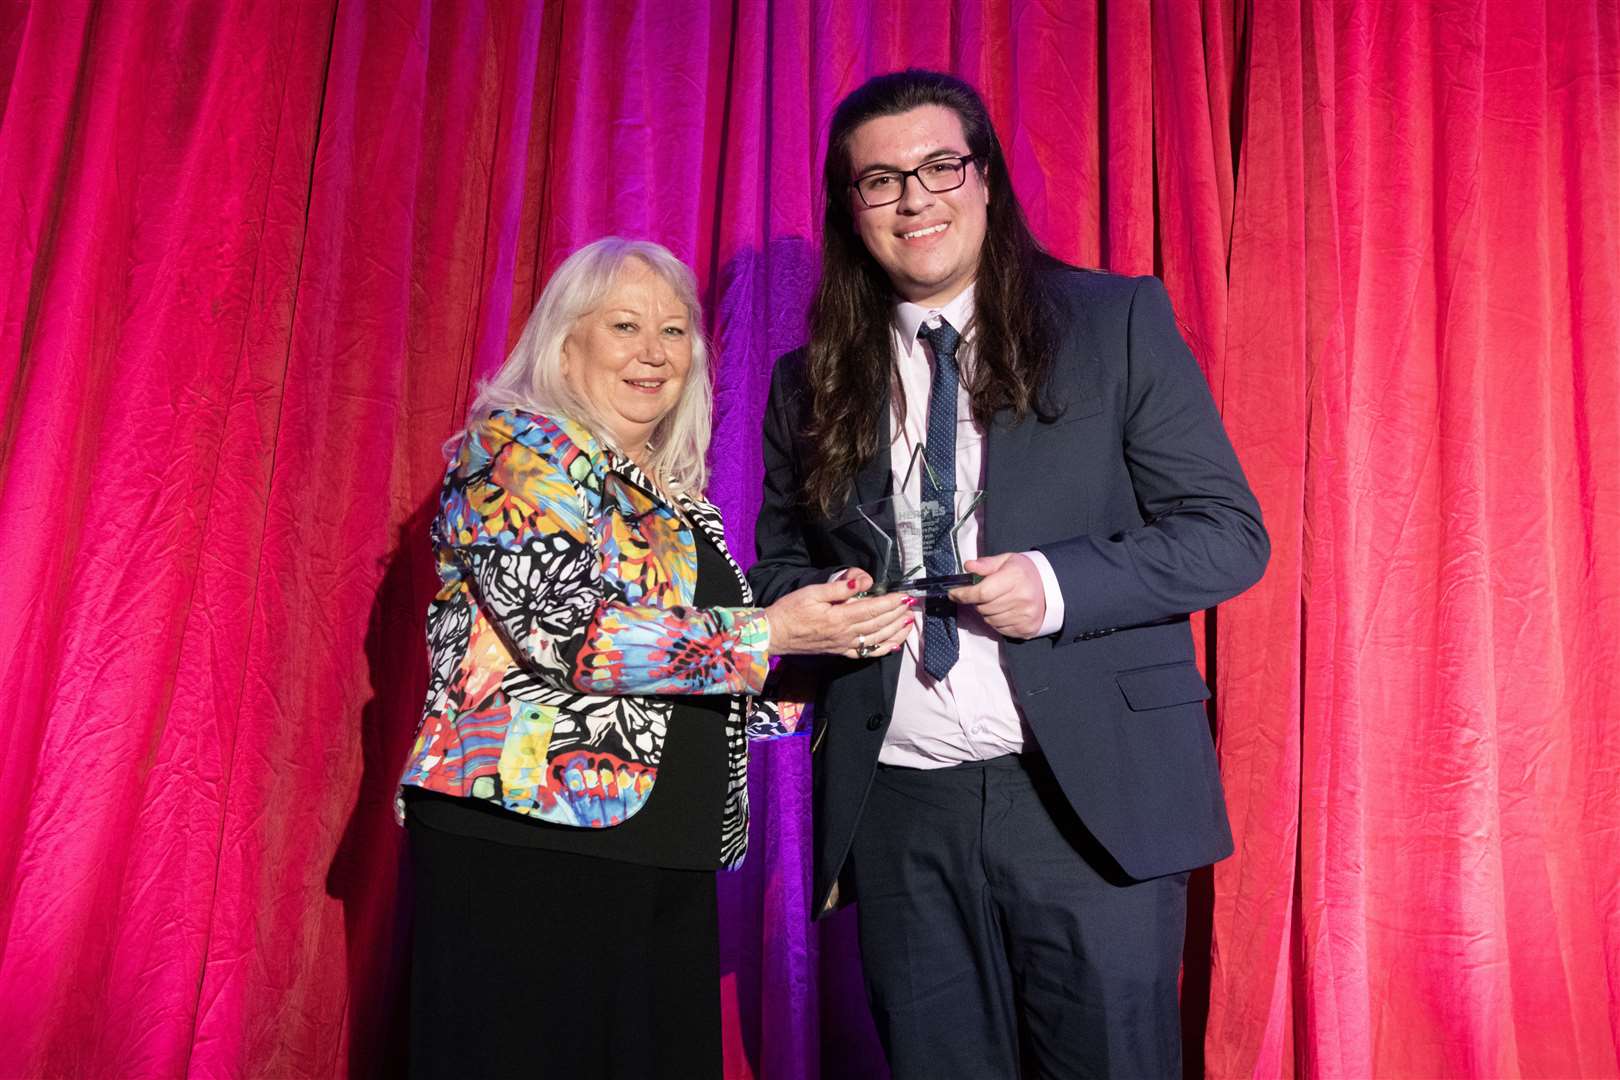 Ben Stewart was awarded Secondary Pupil of the Year Award. He is with sponsor Jackie Andrews, Head of Academic Partnerships at UHI Moray. Picture: Beth Taylor